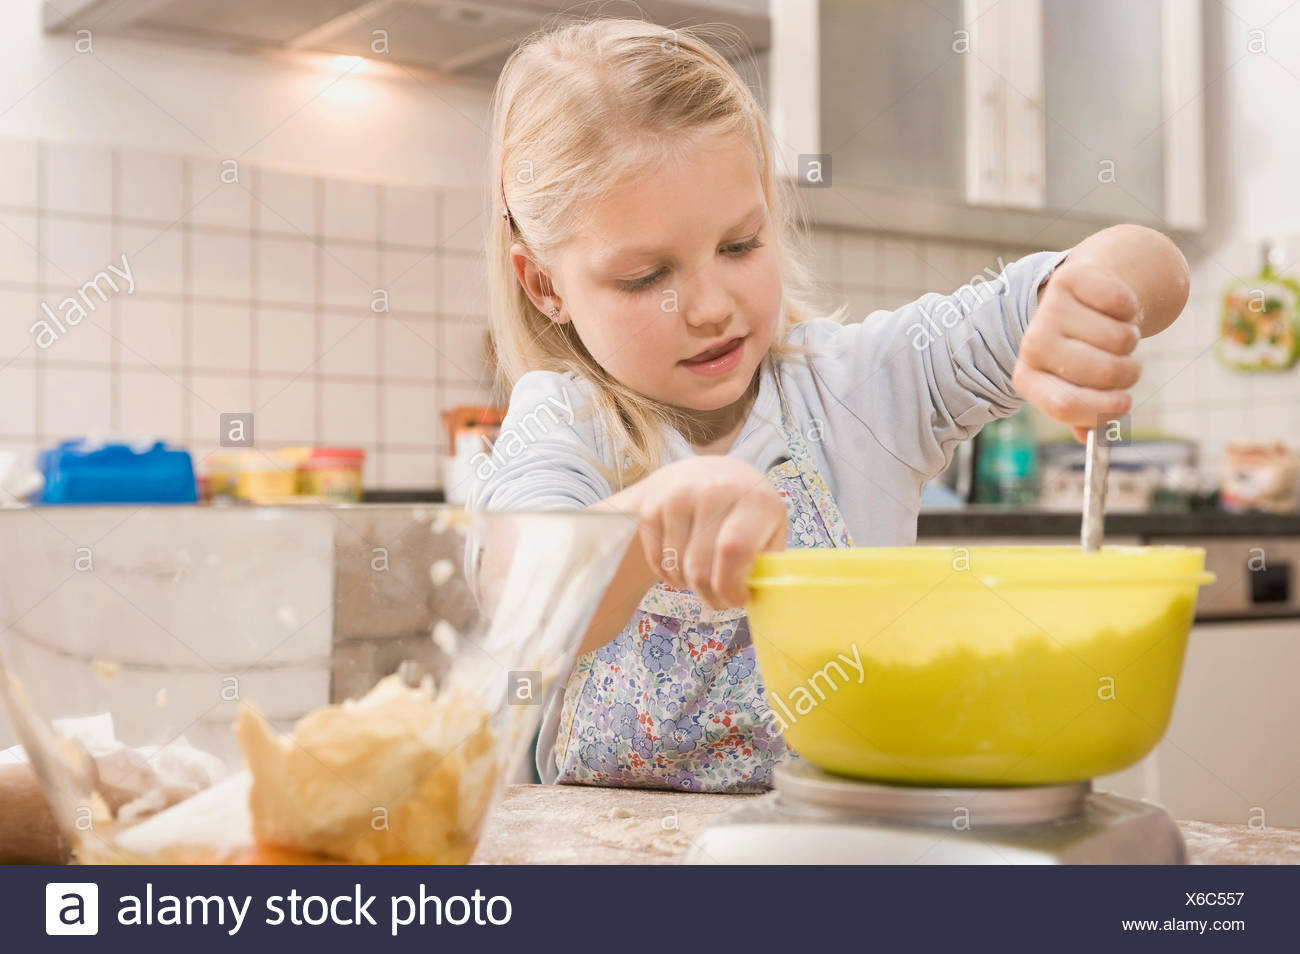 Girl Mixing Flour In Bowl For Cookies Stock Photo Alamy